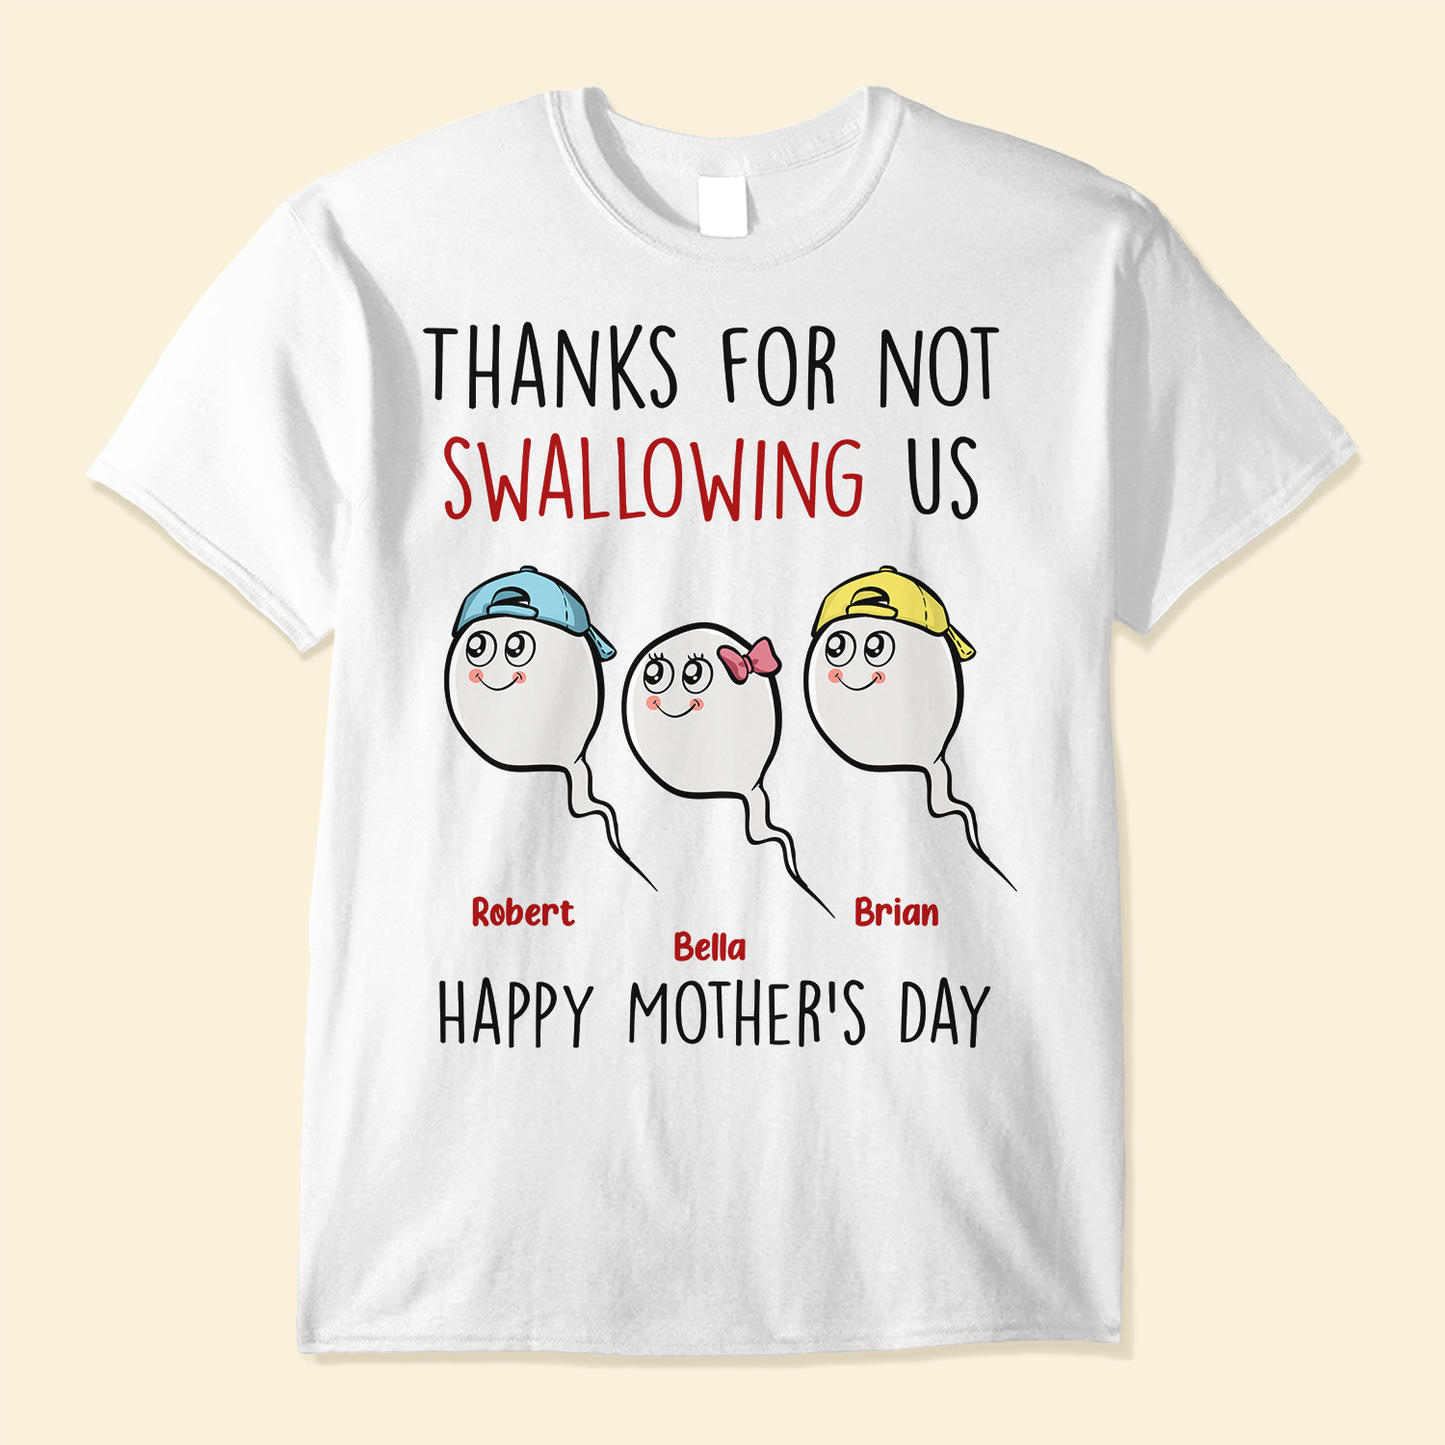 Thanks For Not Swallowing Us - Personalized Shirt